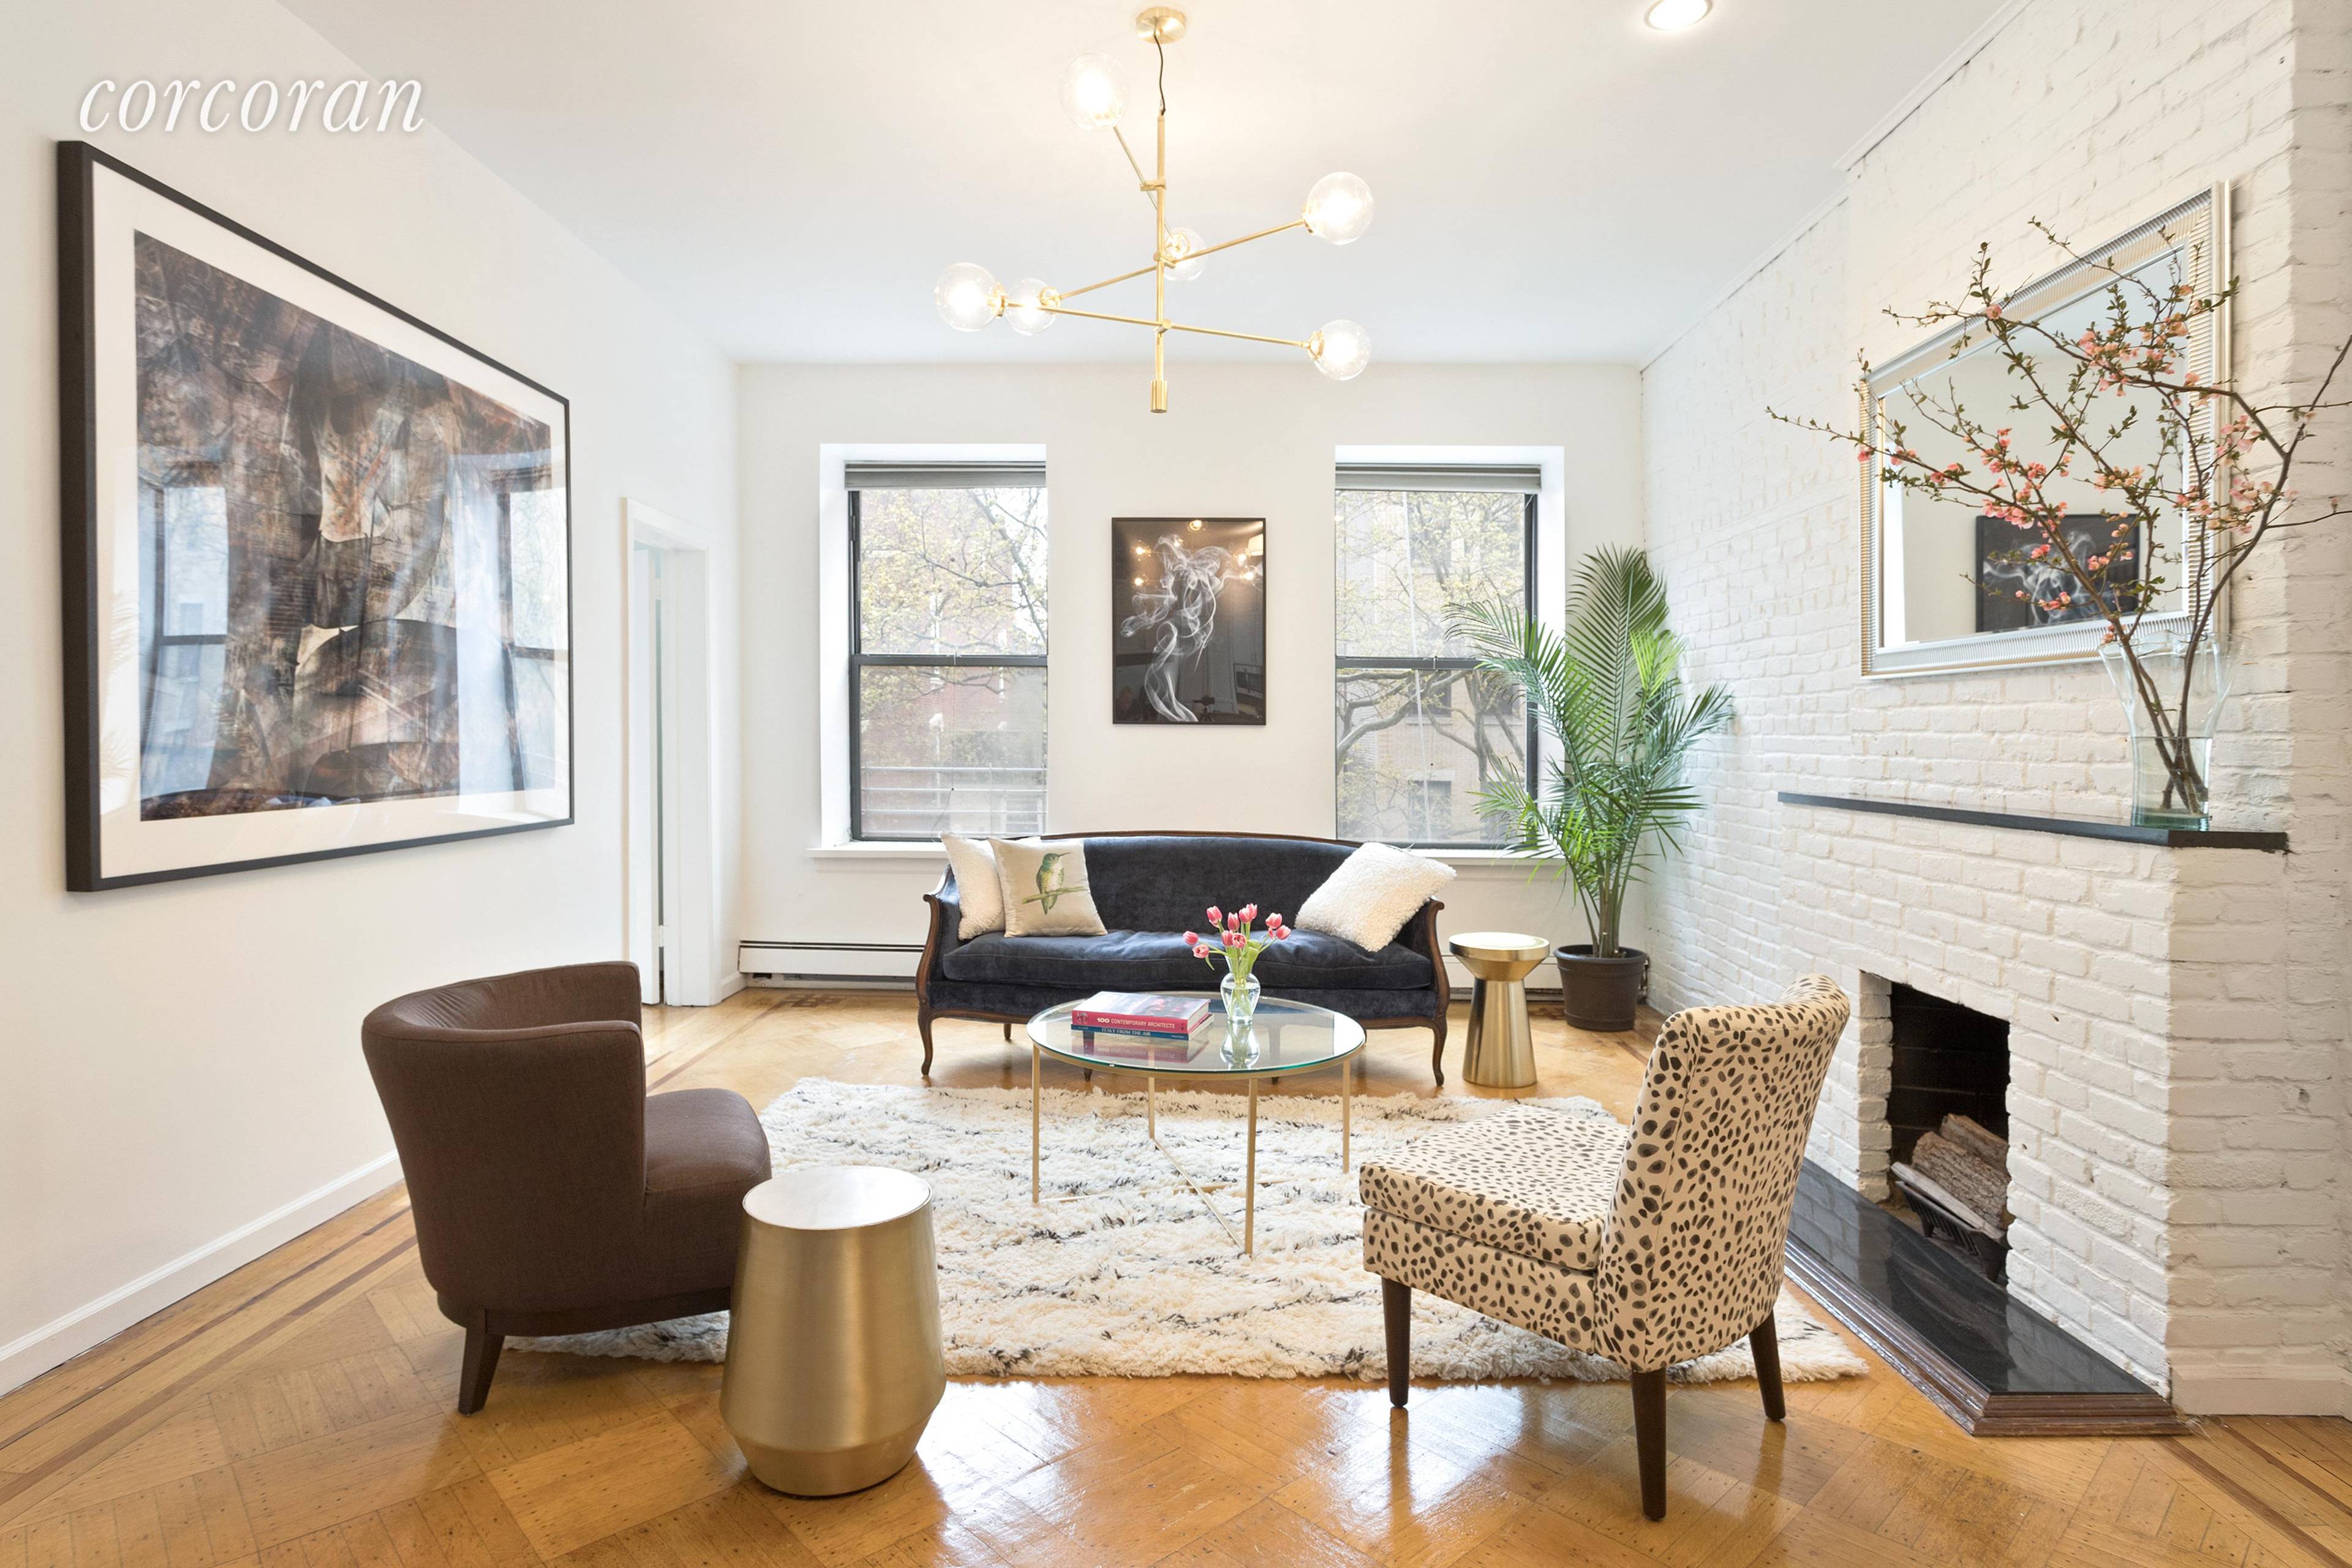 Welcome to 231 President Street, a three bedroom residence where space, style and grace come together to create one of the most captivating co ops in Carroll Gardens.